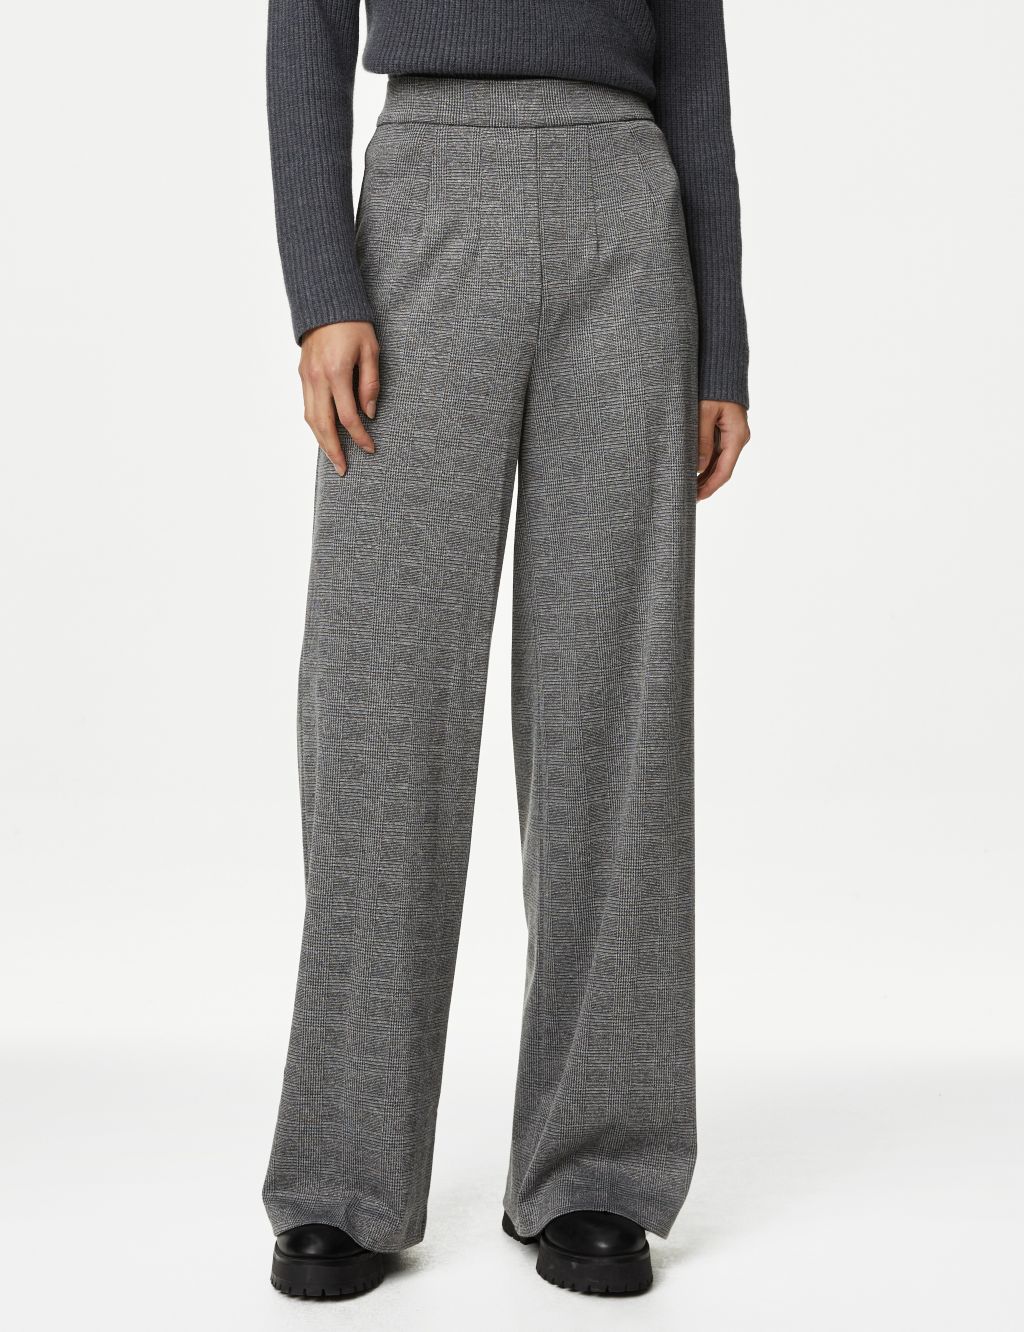 Jersey Checked Wide Leg Trousers image 3